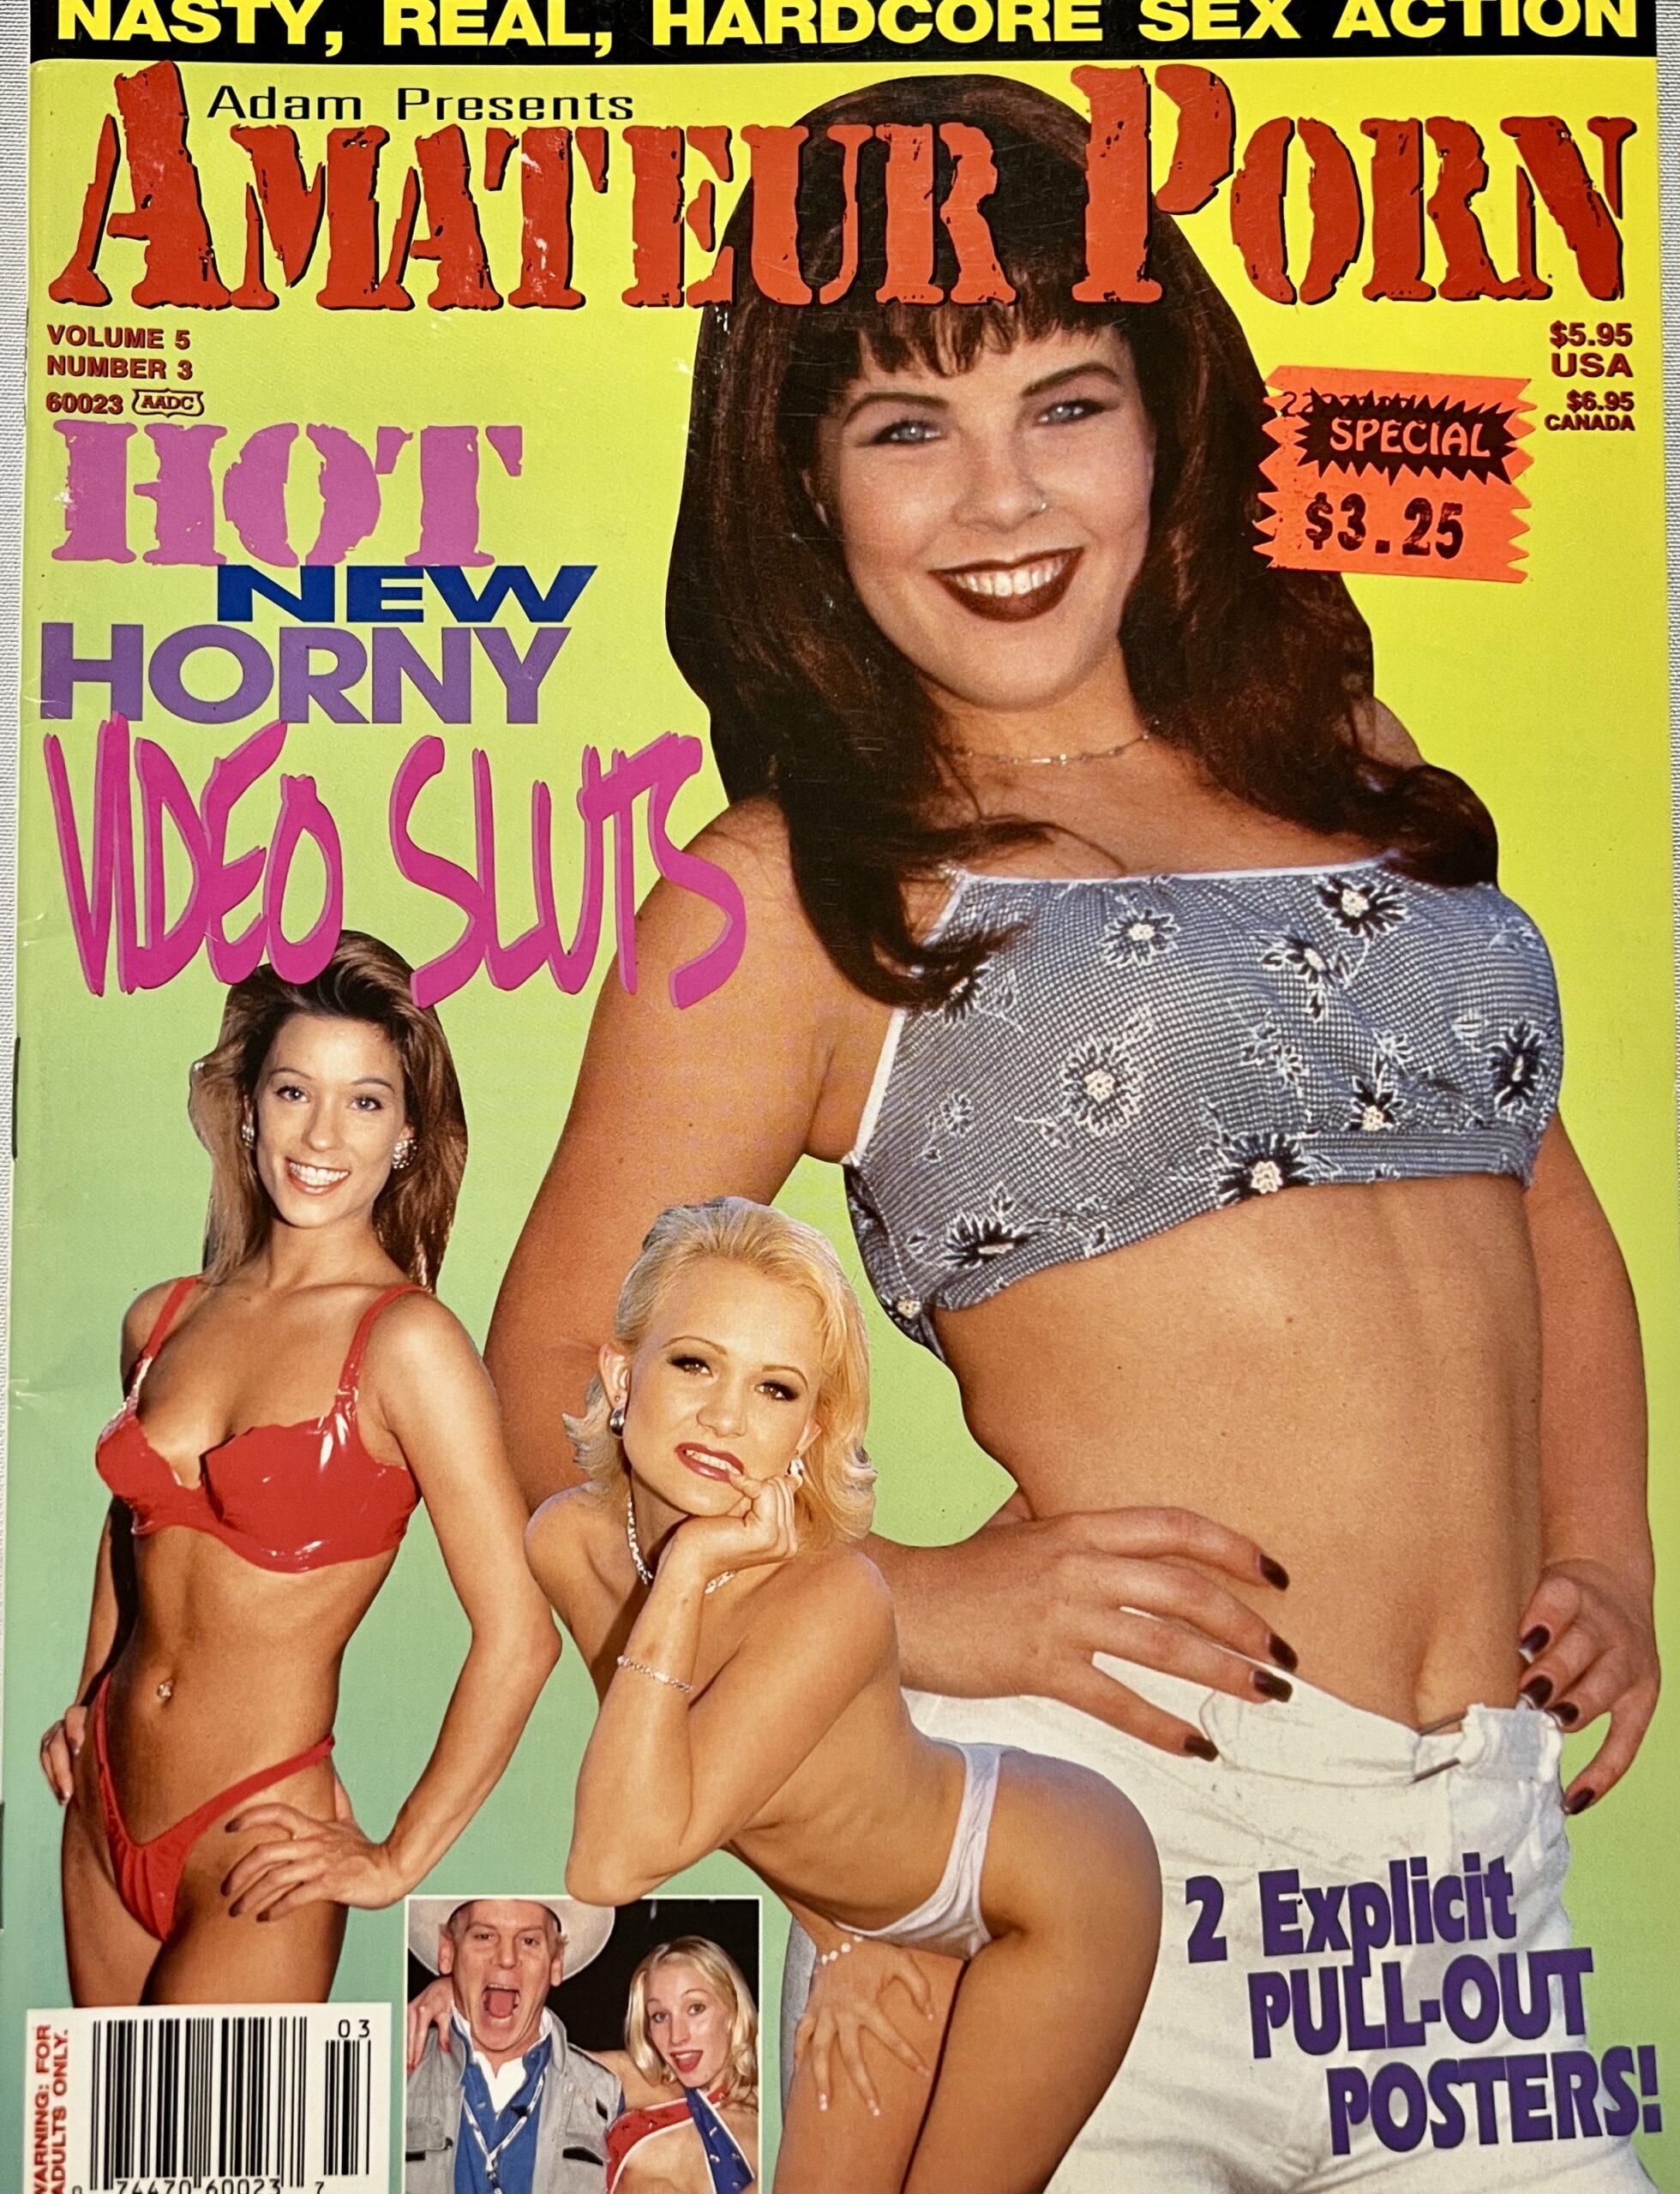 Adam Amateur Porn August 1997 *2 Explicit PULL-OUT POSTERS, Never Opened*